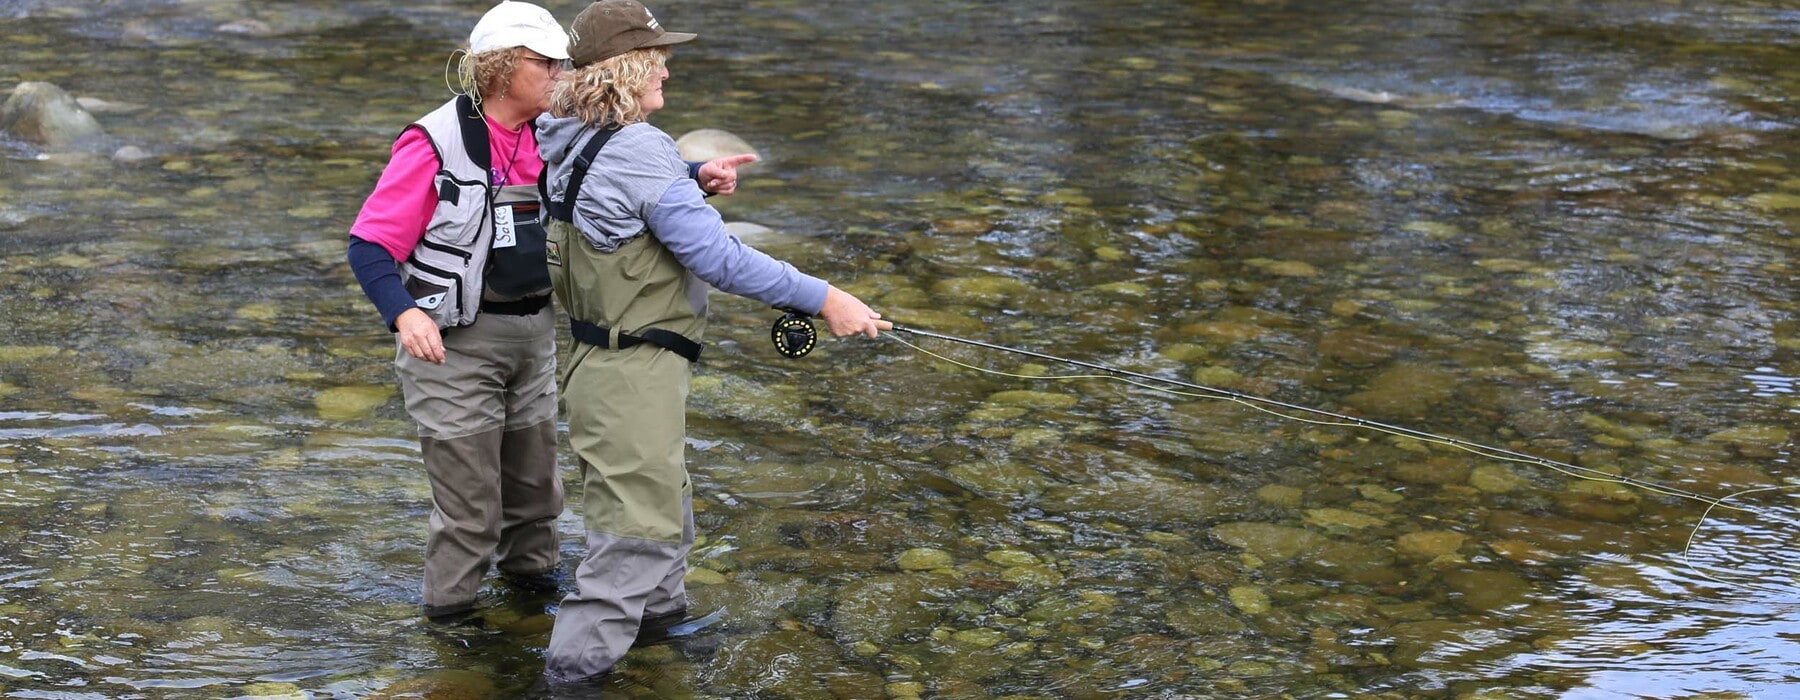 Two people fly fishing in a river